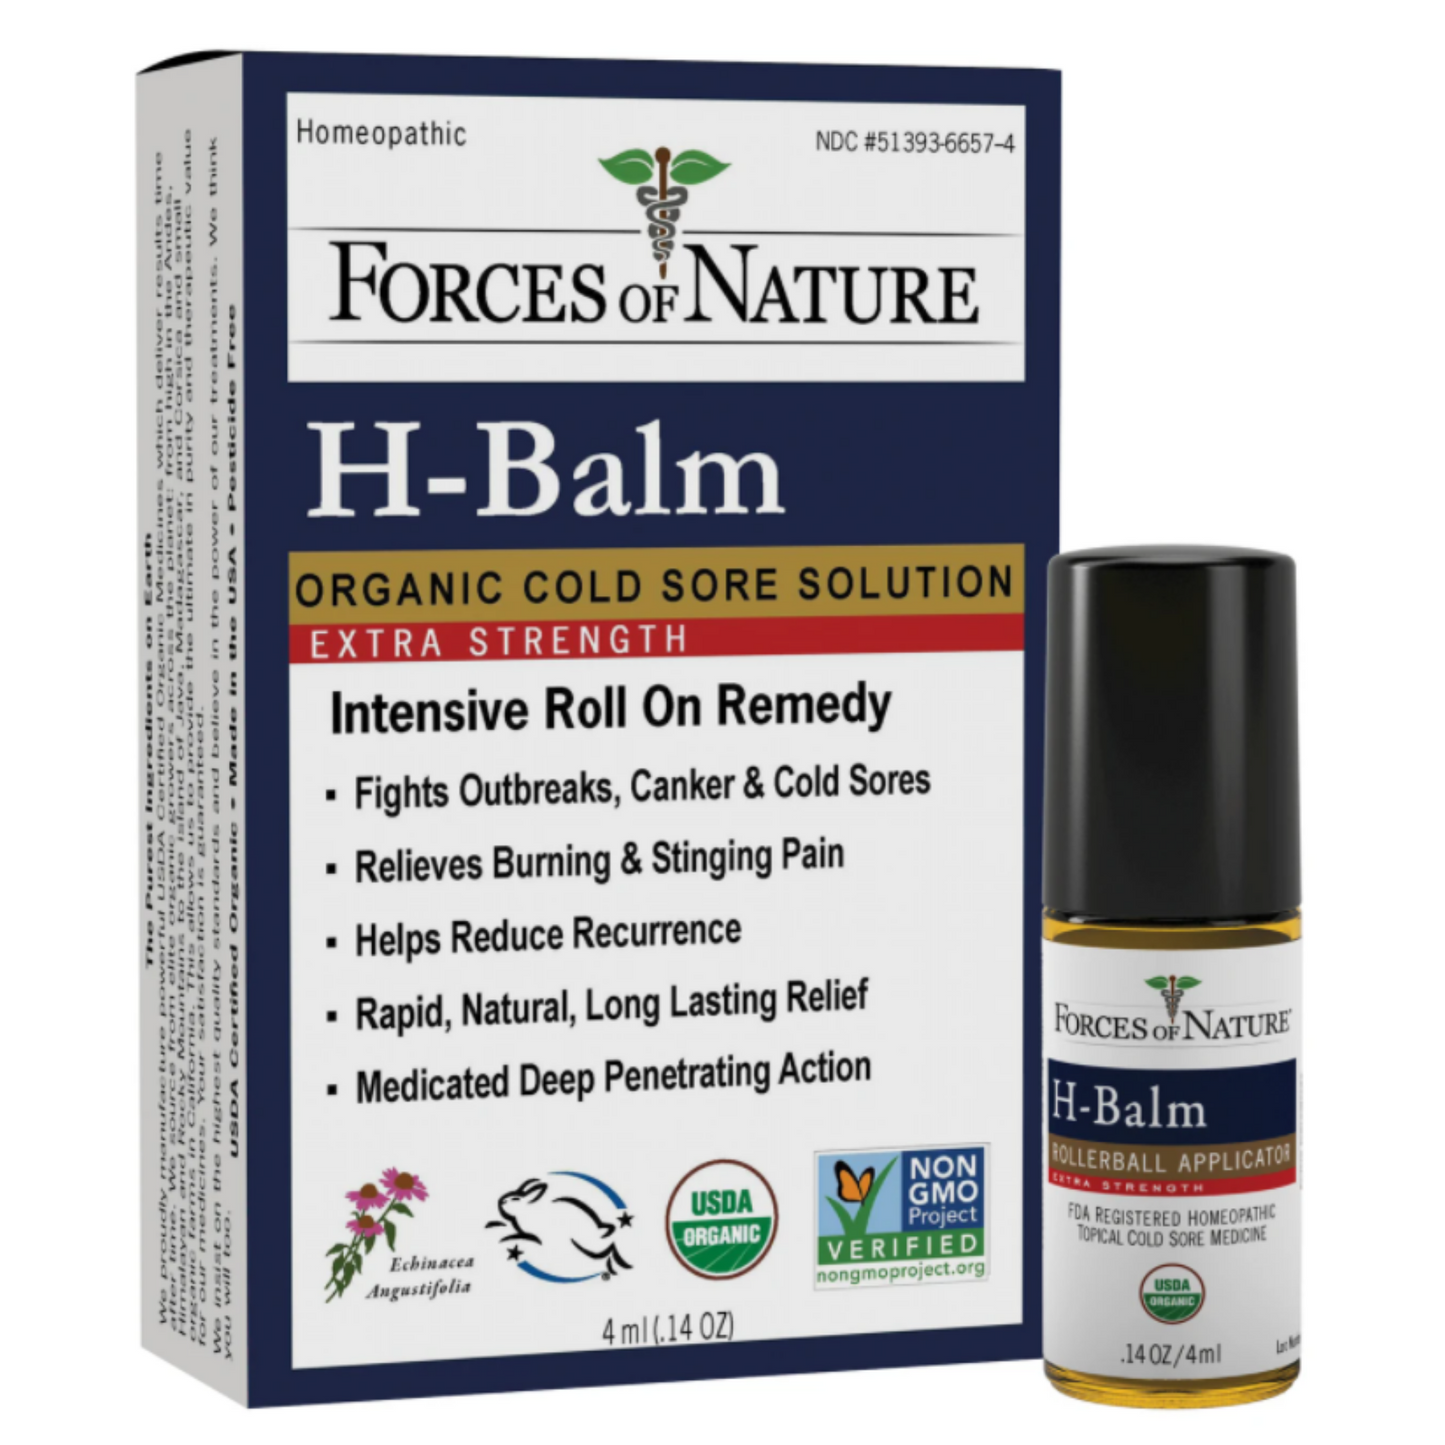 Primary image of H-Balm Cold Sore Solution